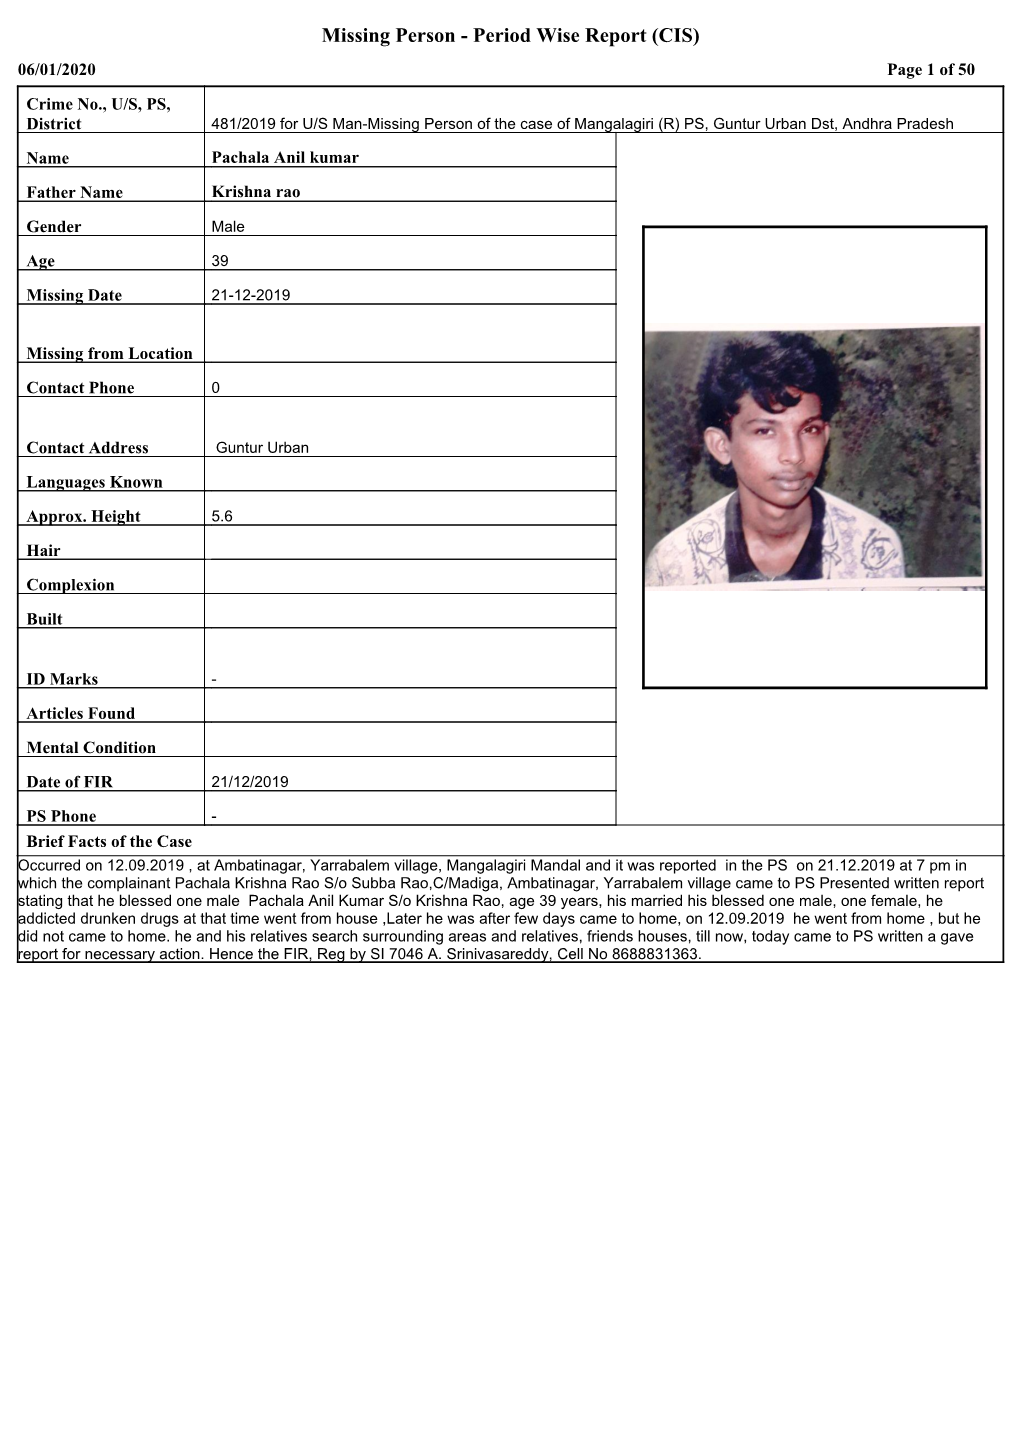 Missing Person - Period Wise Report (CIS) 06/01/2020 Page 1 of 50